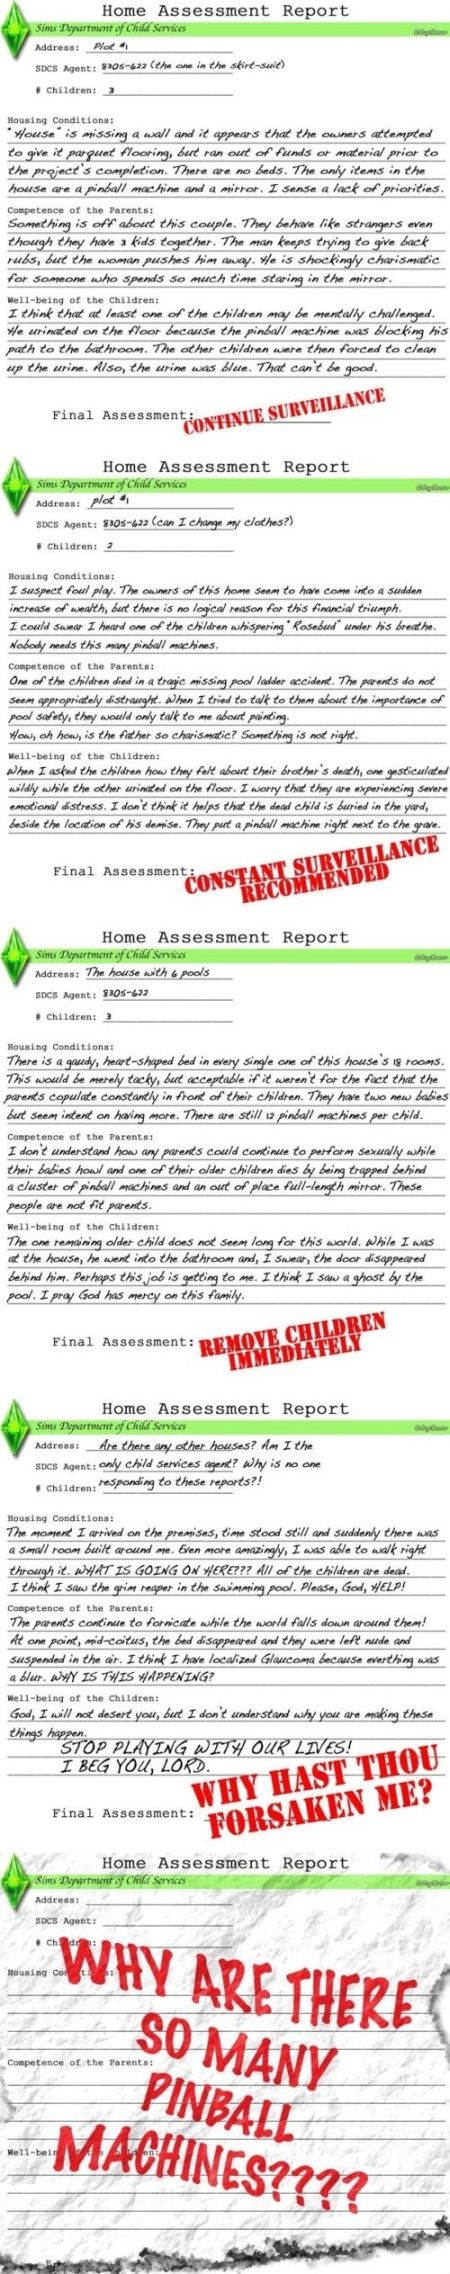 Home assessment reports- Sims humor at PMSLweb.com